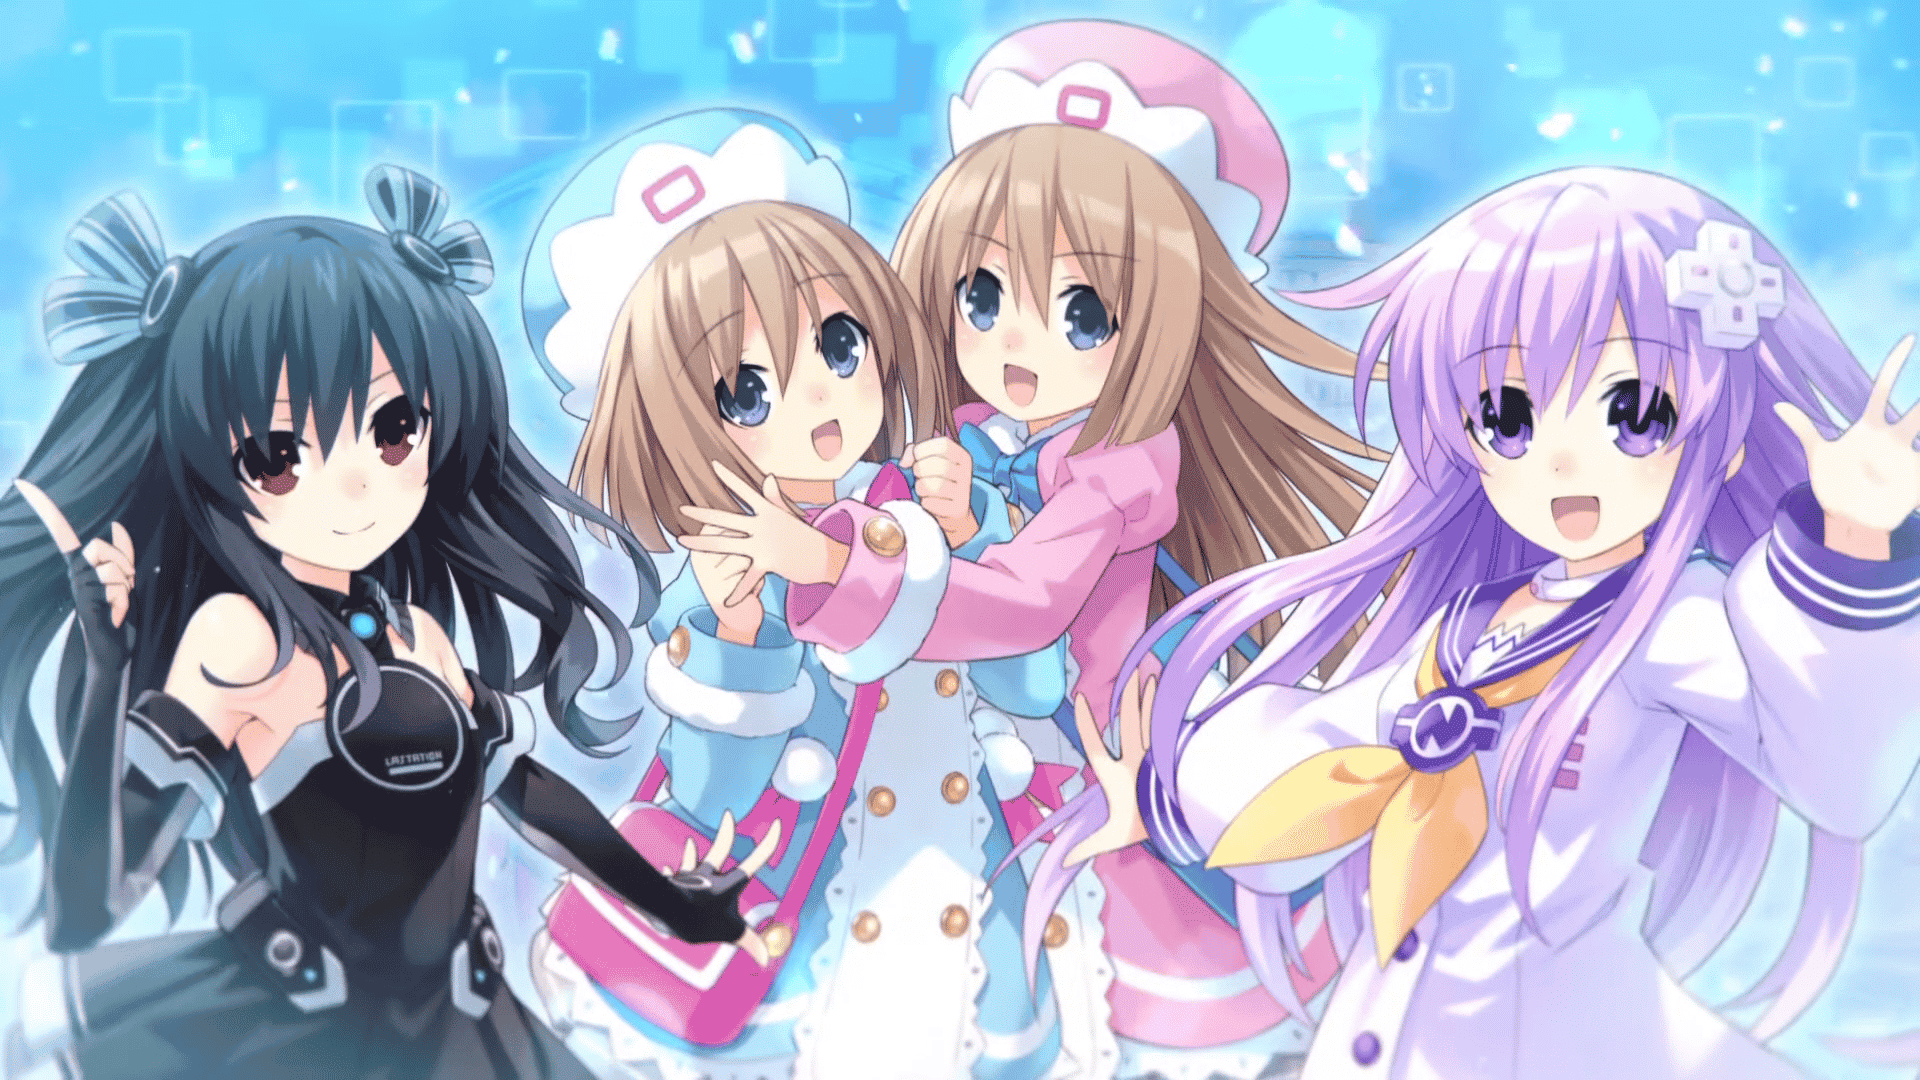 Neptunia: Sisters vs. Sisters Western Release Officially Announced in New Trailer; English Voice Over Option Confirmed